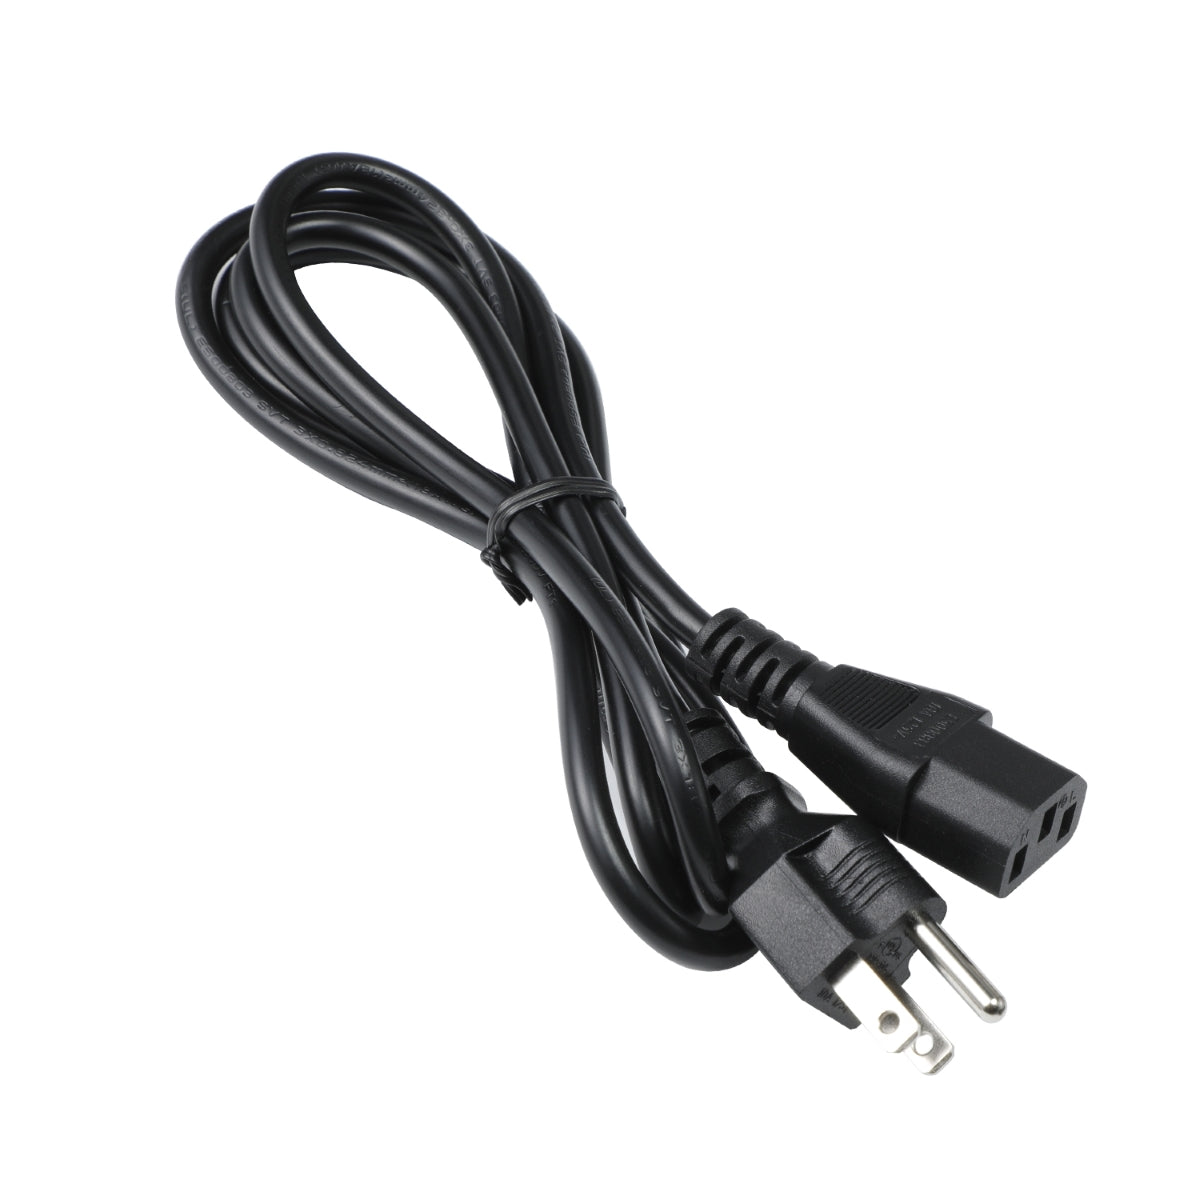 Power Cord for Acer VG240Y Monitor.